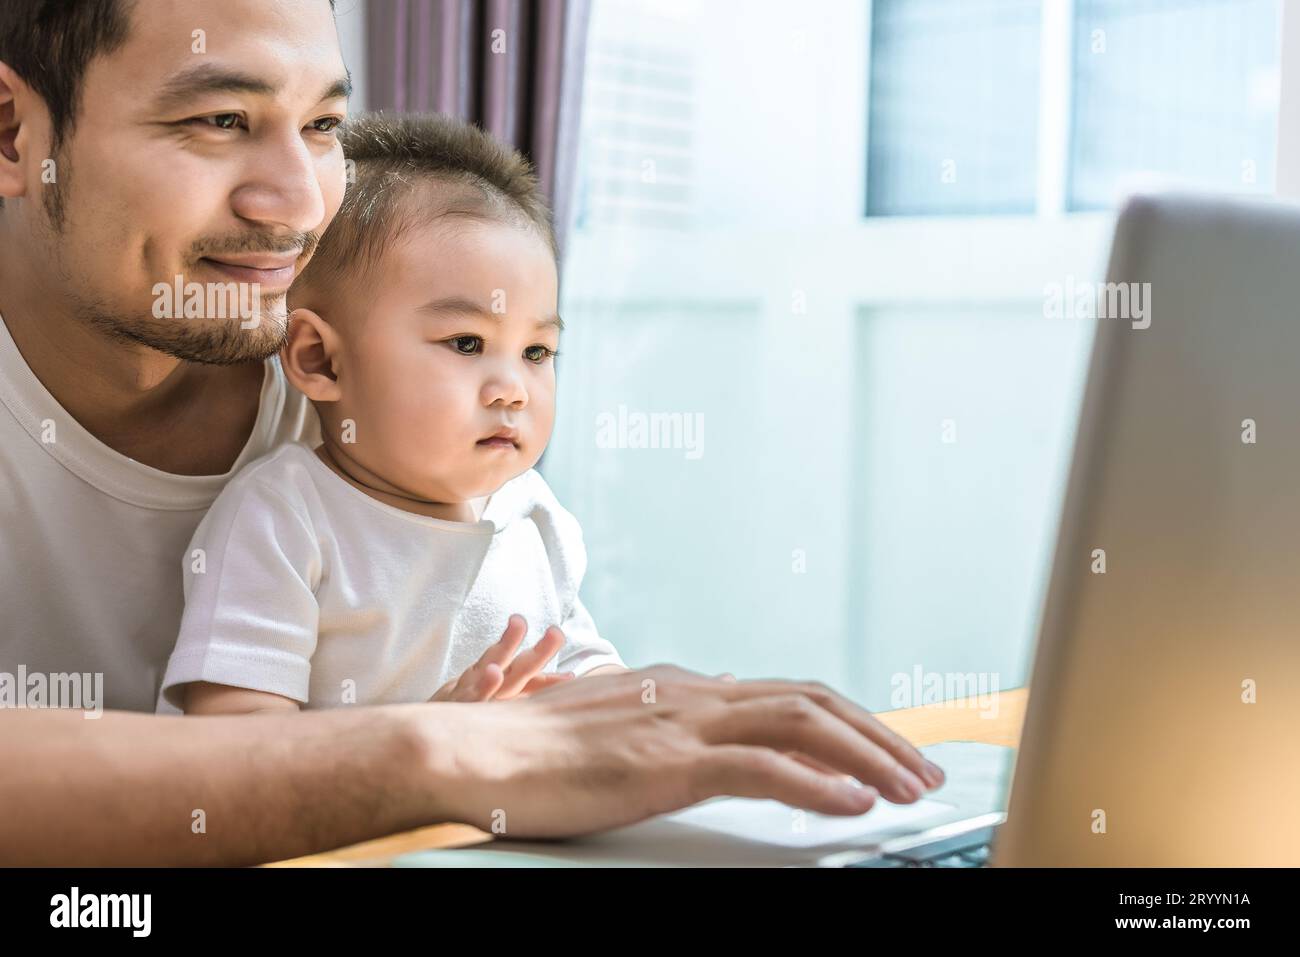 Single dad and son using laptop together happily. Technology and Lifestyles concept. Happy family and baby theme. Stock Photo